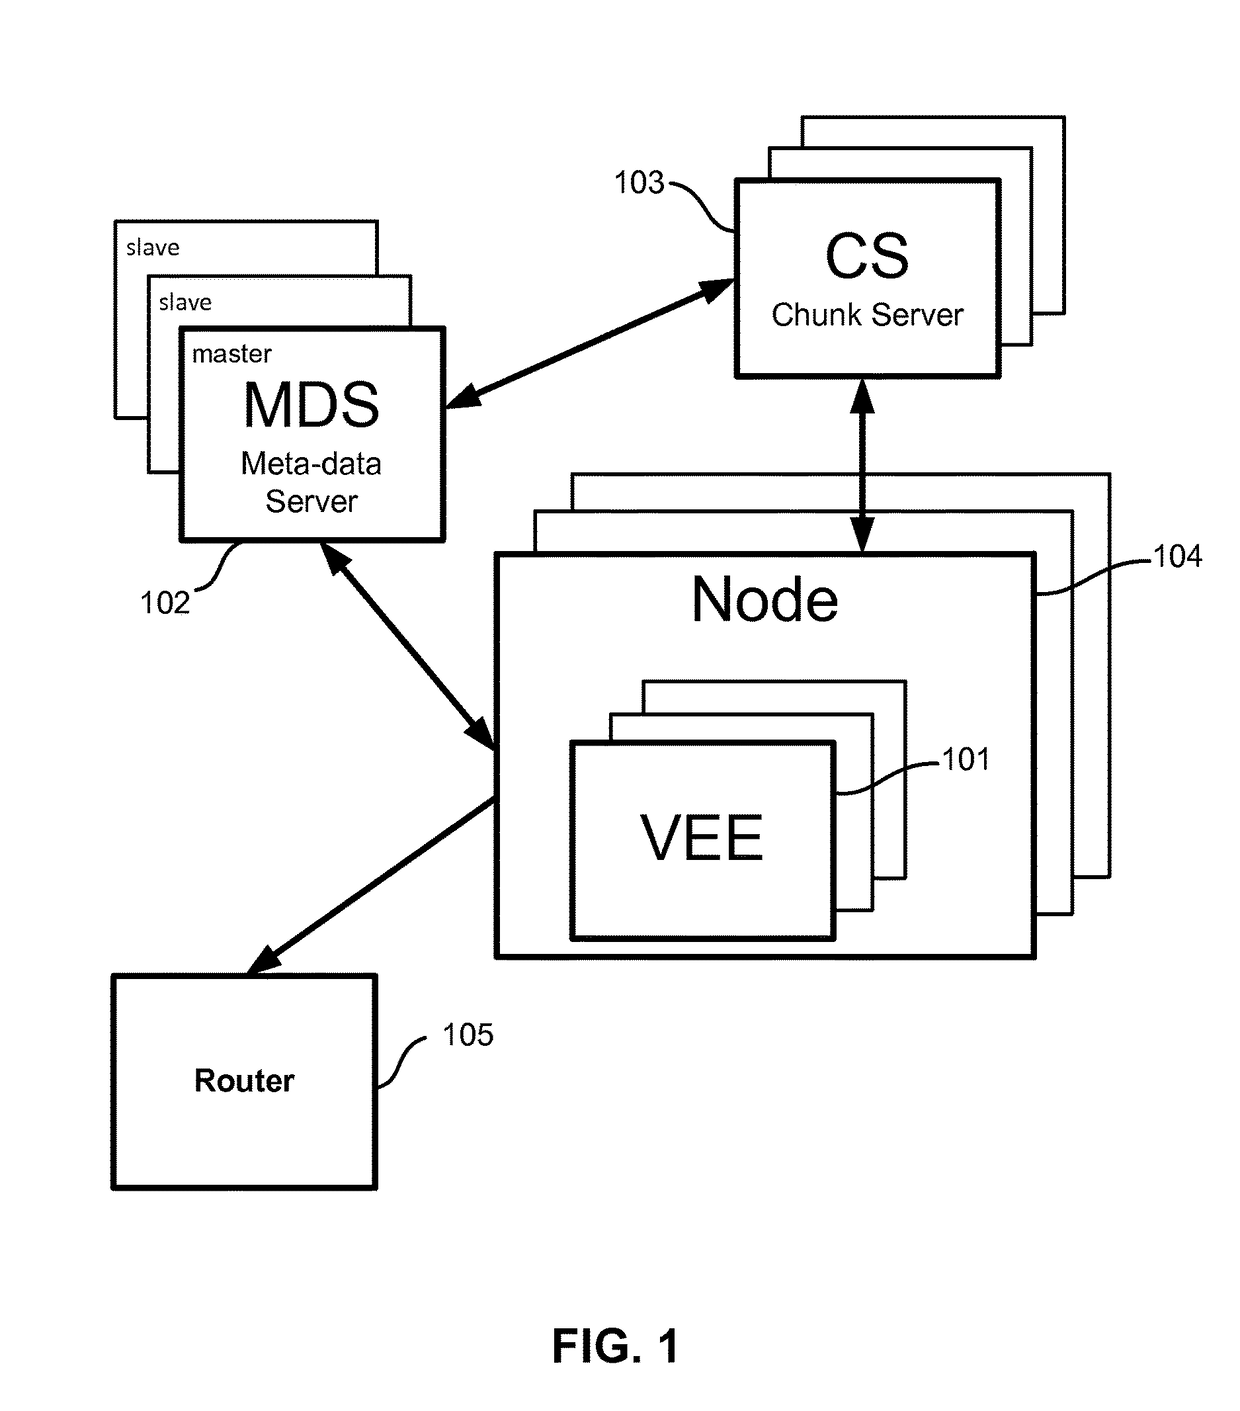 Method for high availability of services in cloud computing systems